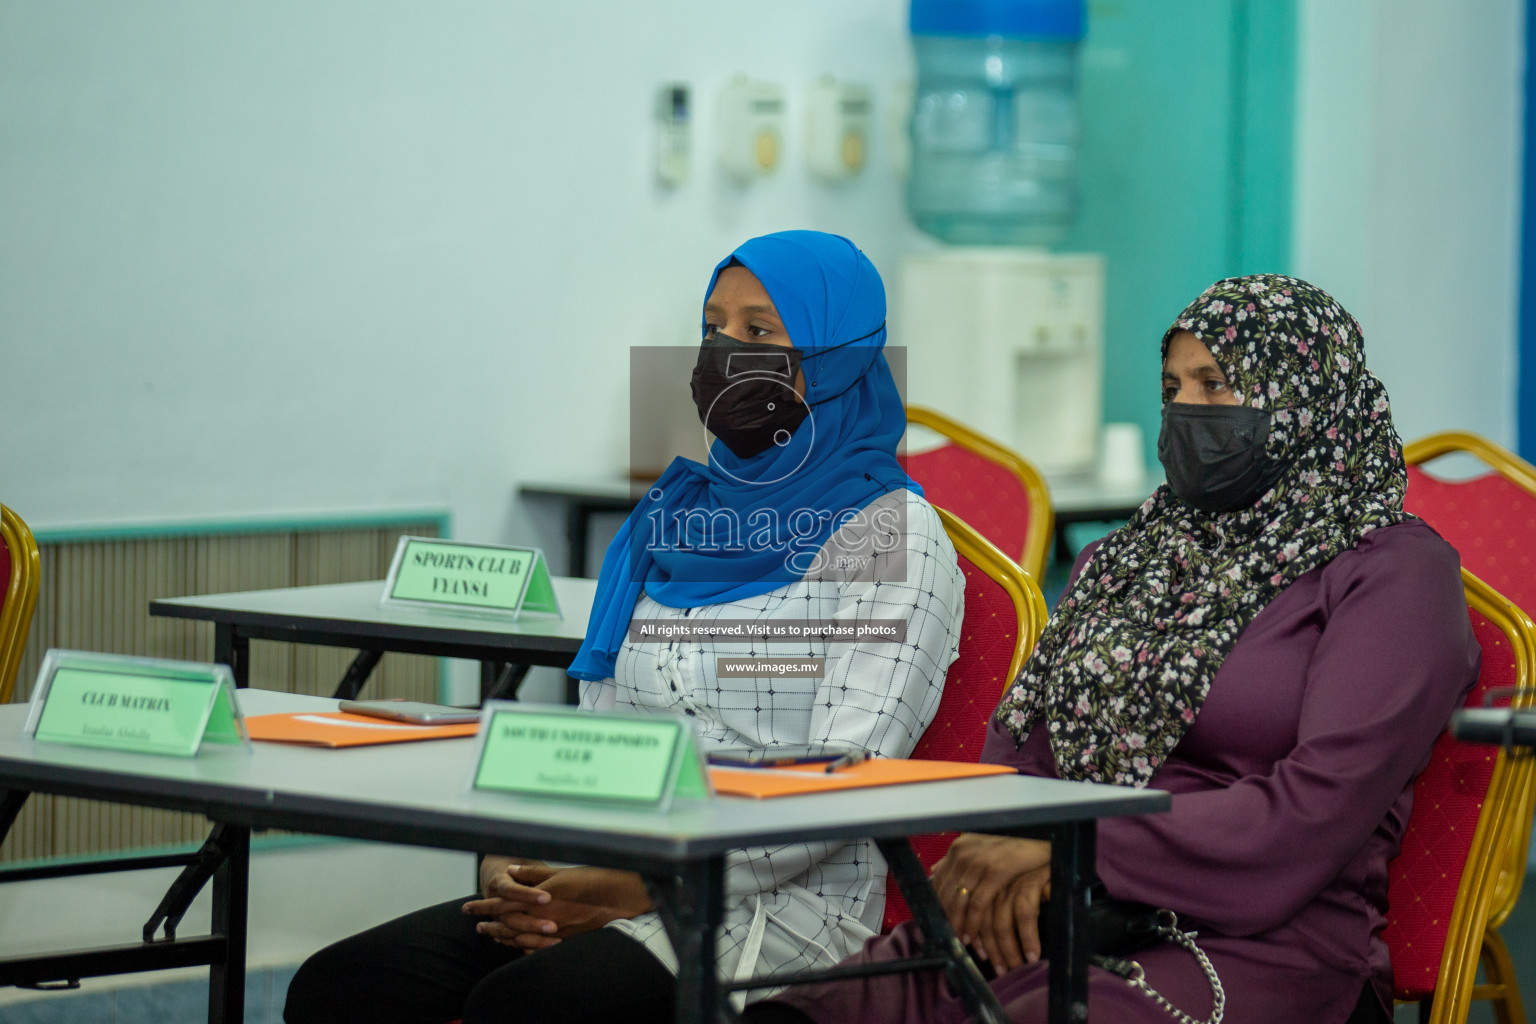 Annual General Meeting 2022 of Netball Association of Maldives held in Social Center, Male', Maldives on 7 March 2022